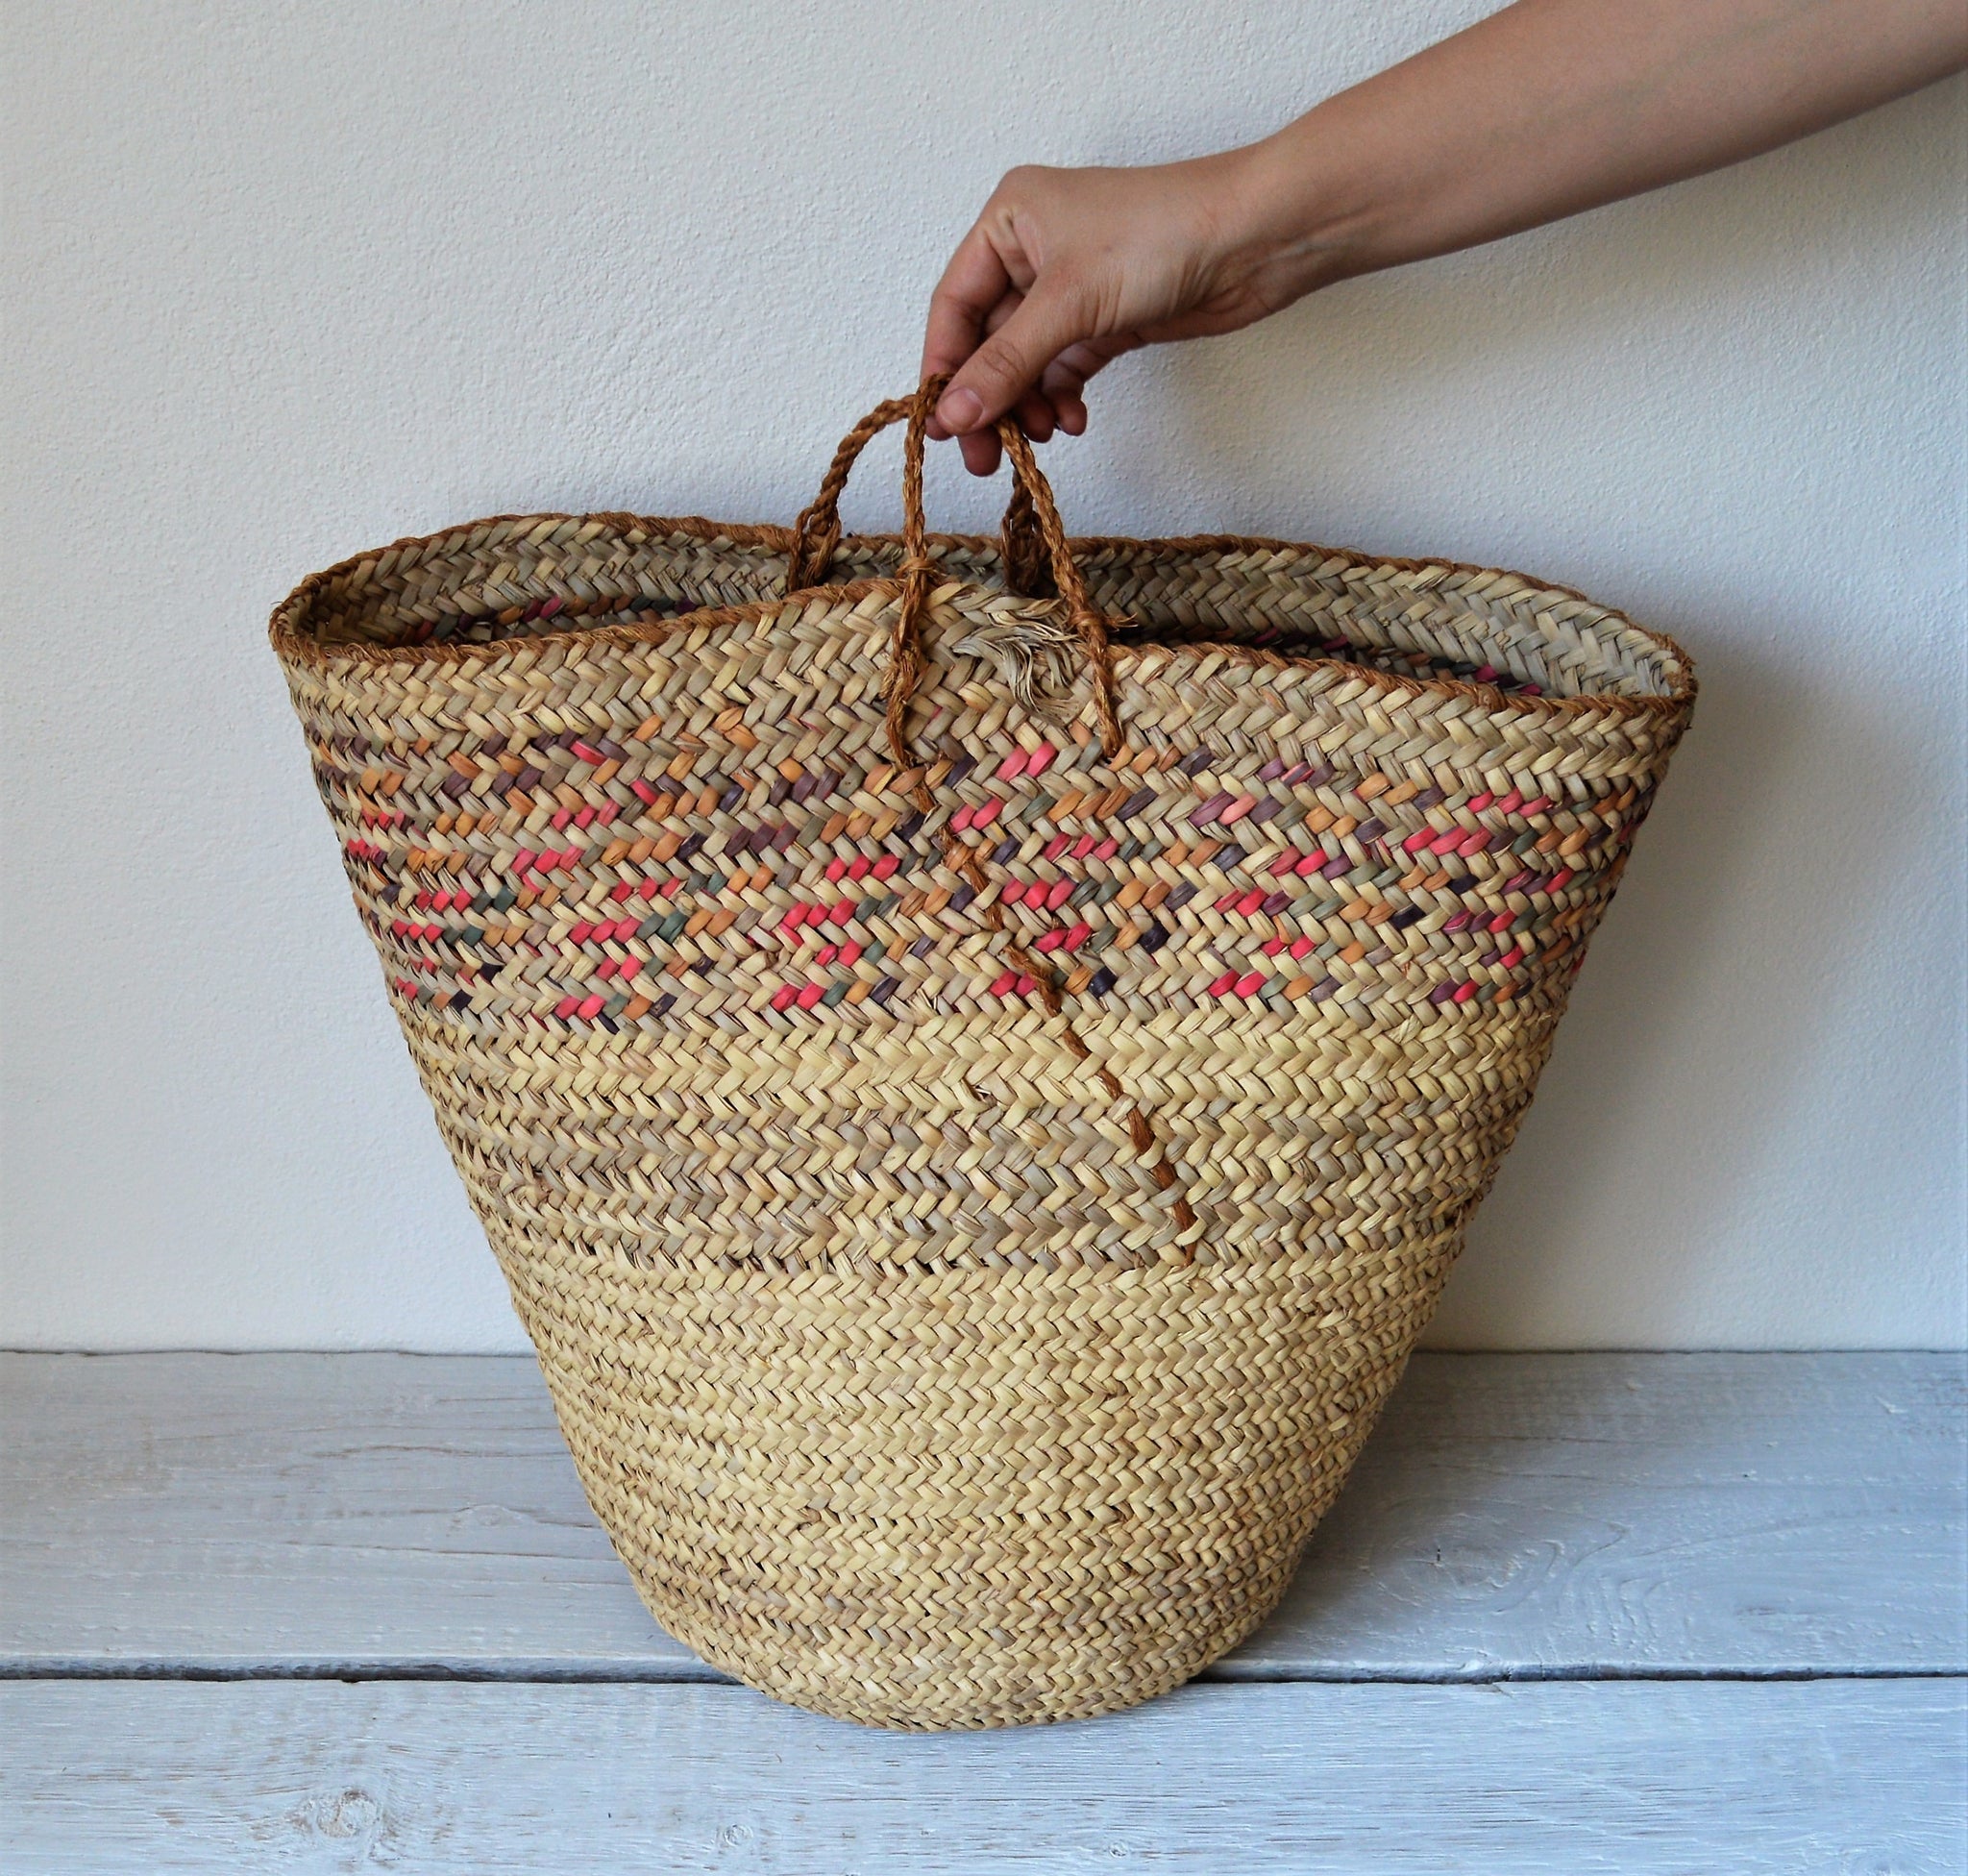 Vintage woven basket from Nubia